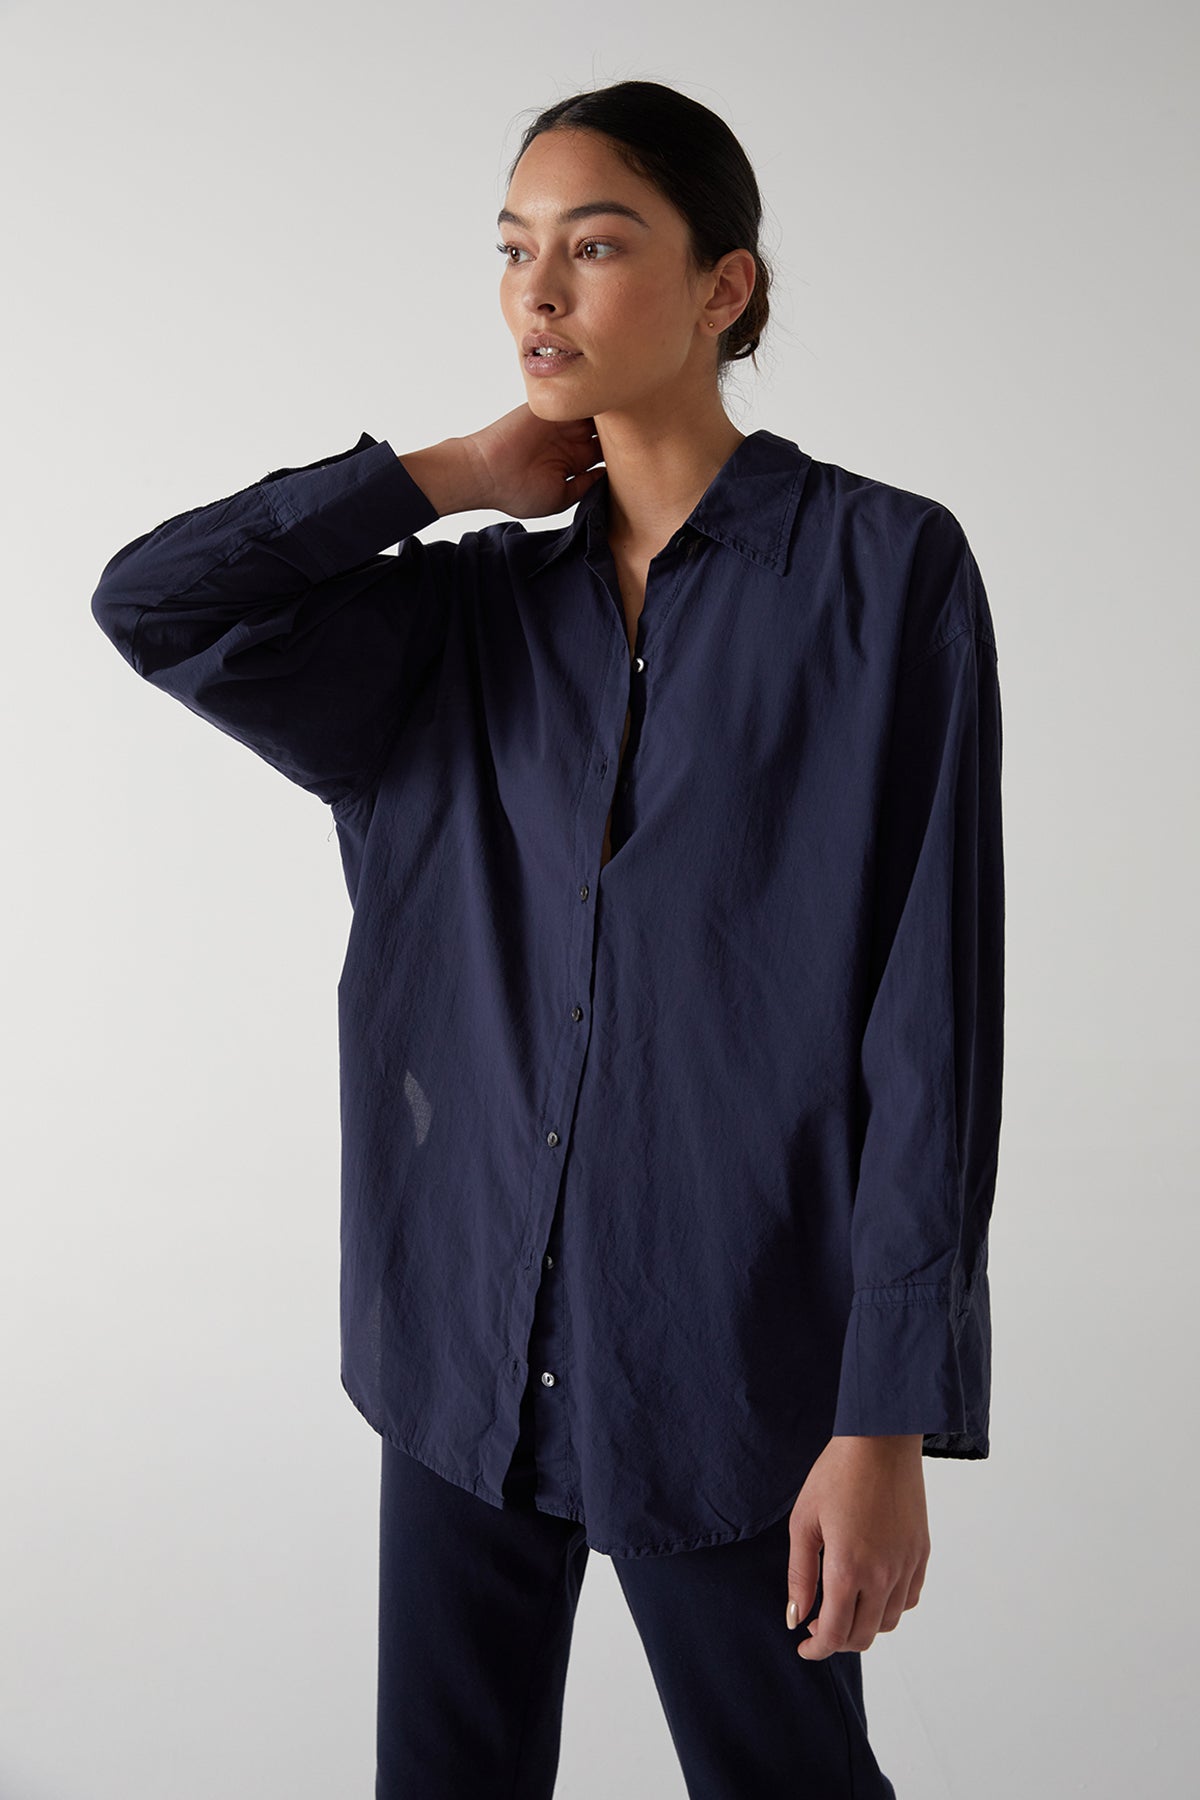   Redondo Button-Up Shirt in navy front 